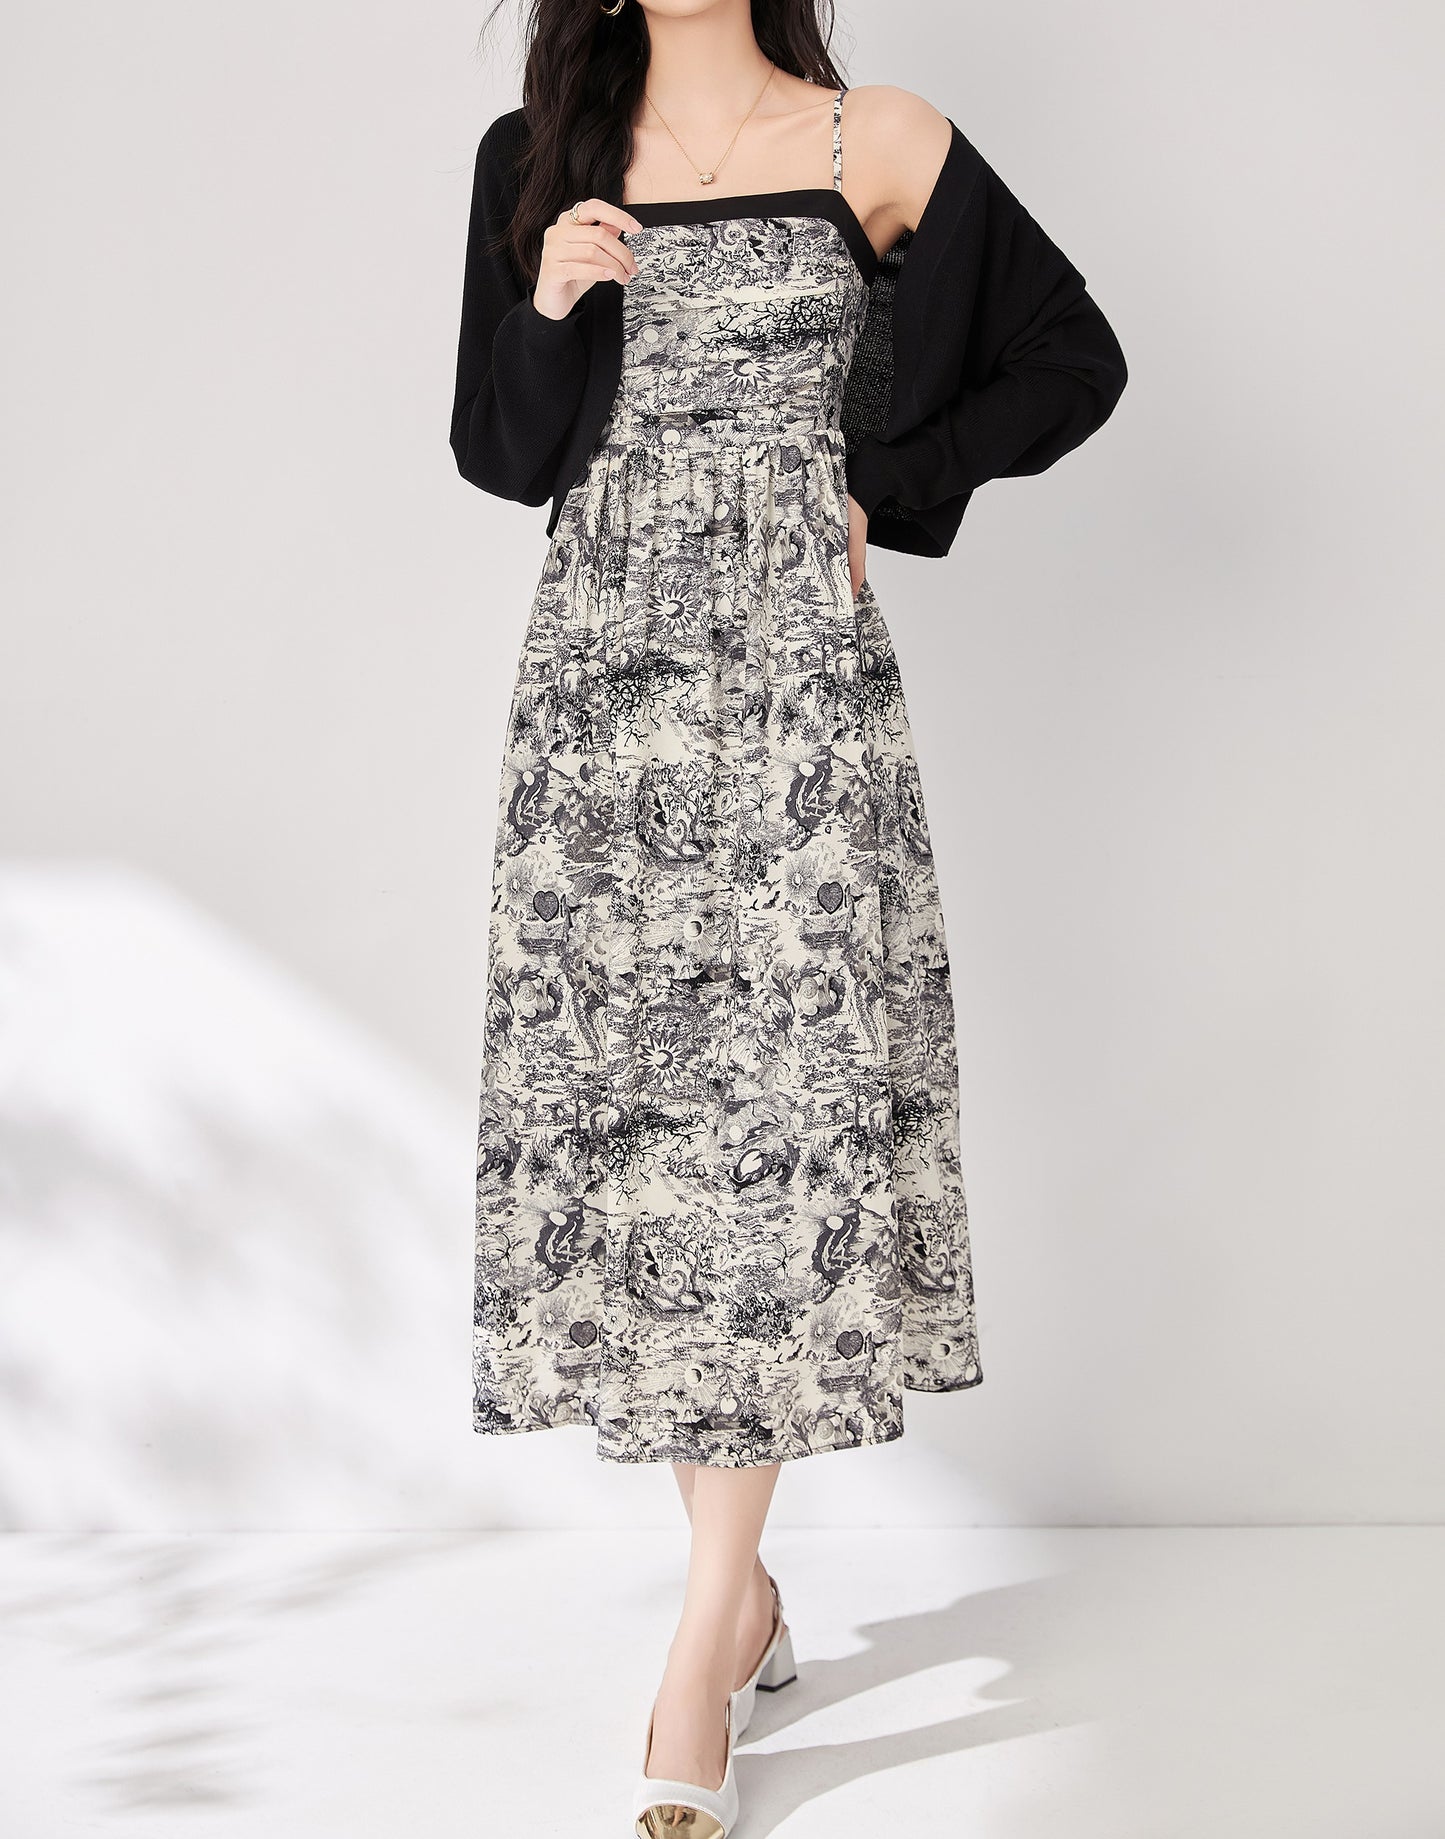 Nadeline 2 piece set chiffon spaghetti strap printed dress with knitted cropped cardigan